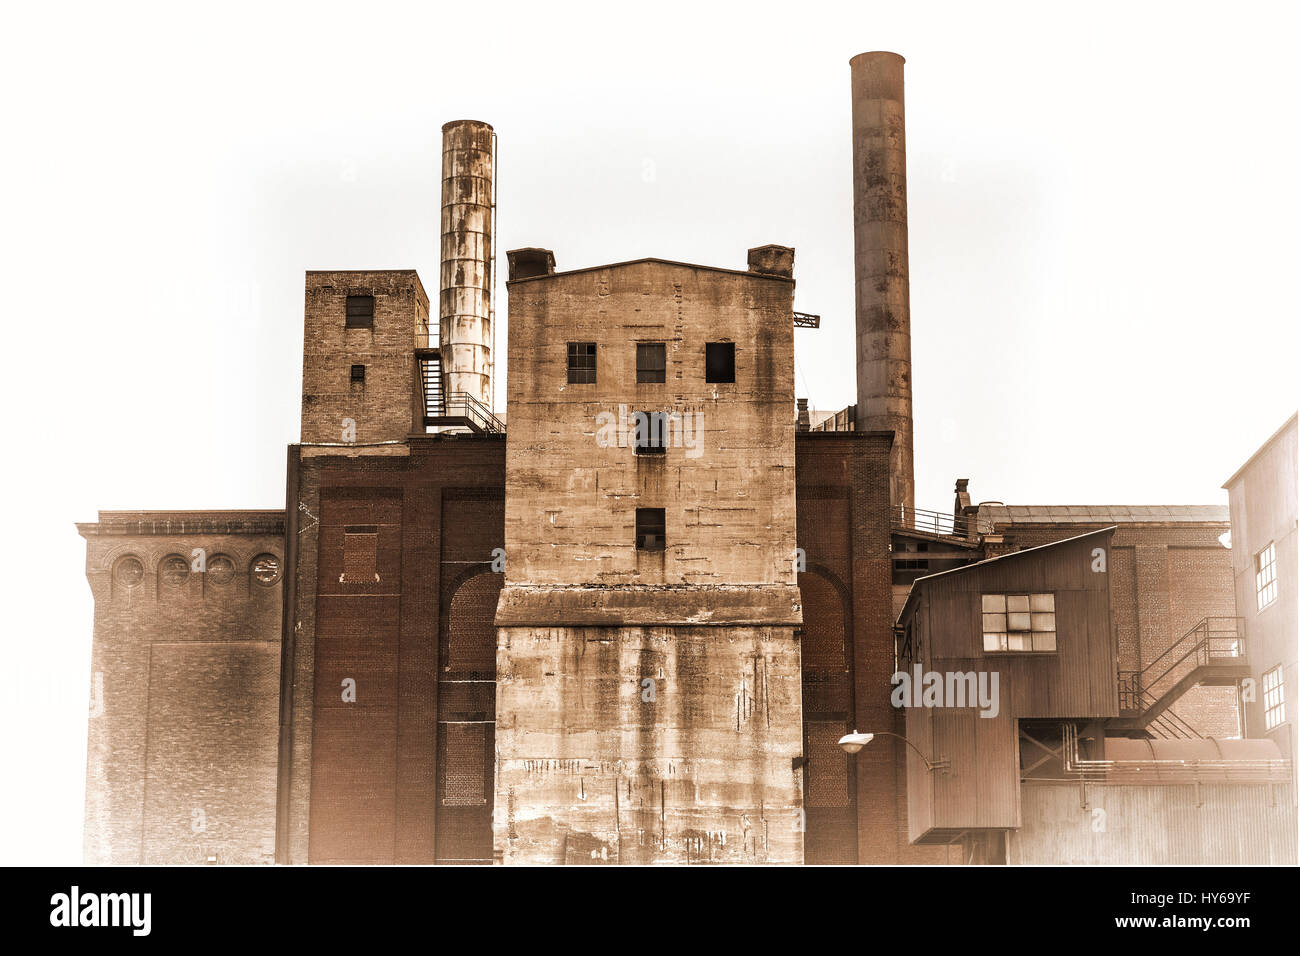 old power plant building with brick, concrete and metal walls, retro sepia toning Stock Photo